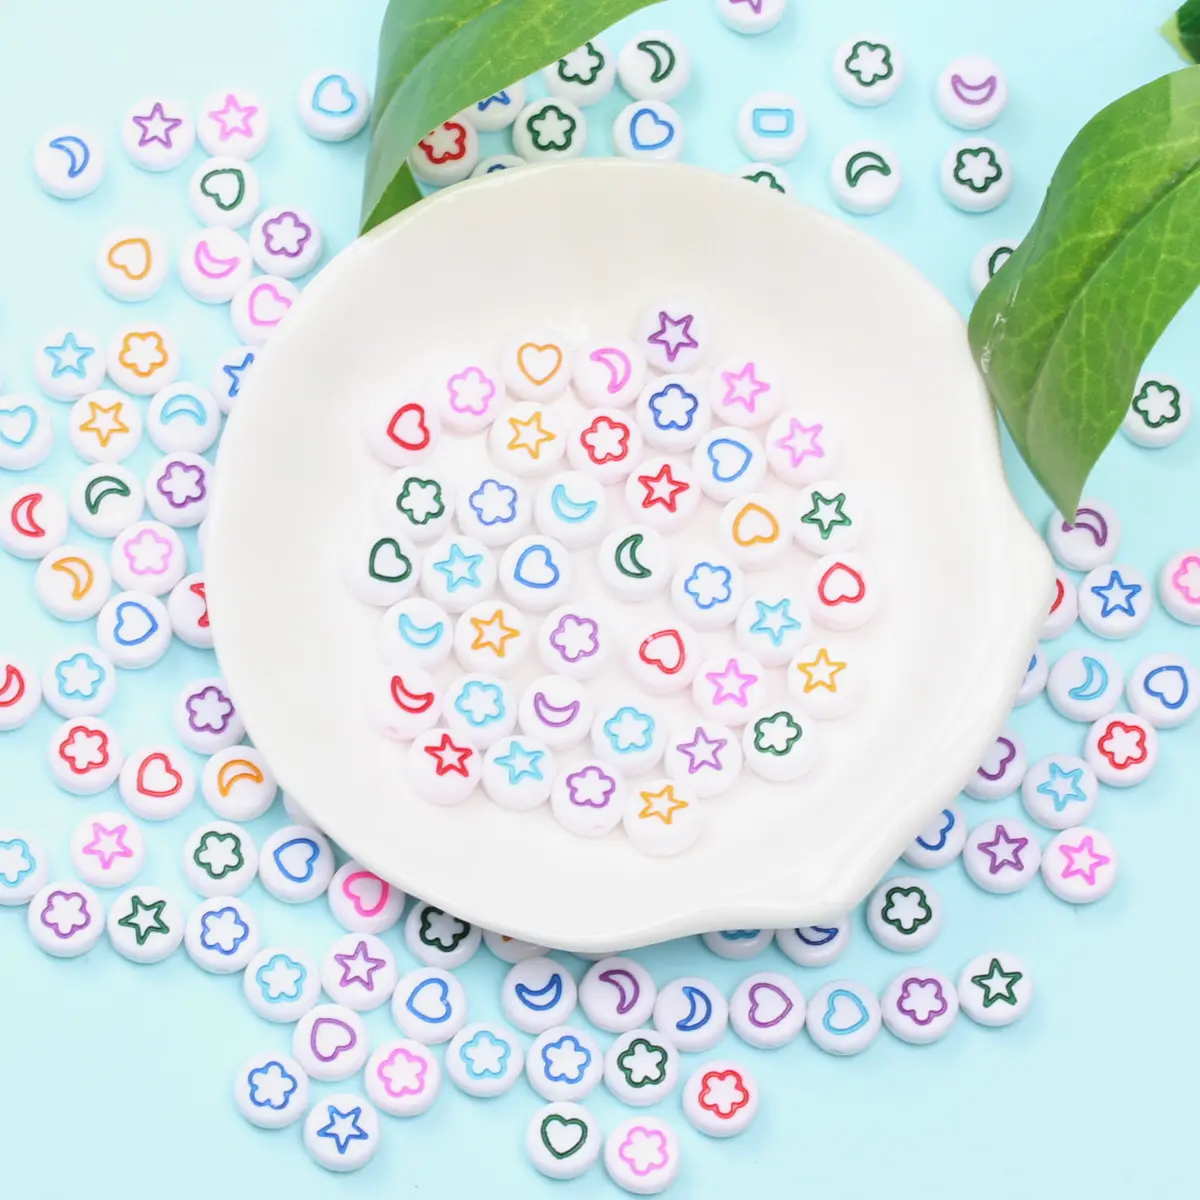 

About 150Pcs 4*7mm Acrylic Flat Round Mixed Moon Star Flower Letter Loose Beads For Jewelry Making DIY Earring Pendant Bracelet